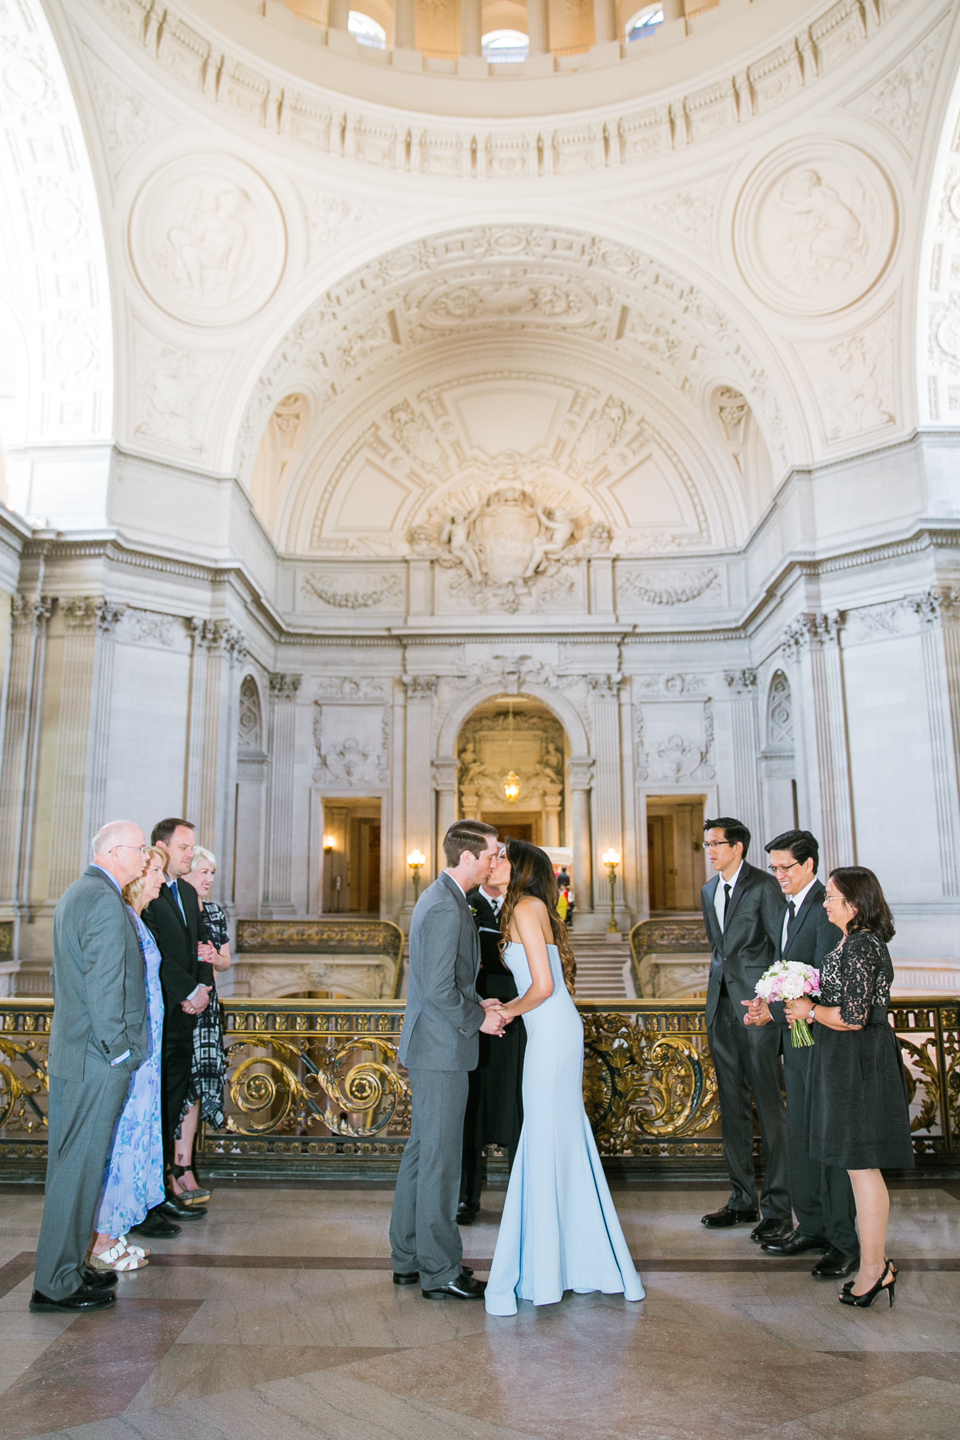 san francisco city hall wedding photography, city hall wedding elopement, blue mermaid wedding dress, breaking wedding traditions, creative city hall wedding photos, san francisco wedding photographer, bay area wedding photography, j, vanessa nicole engagement ring, asmine lee photography